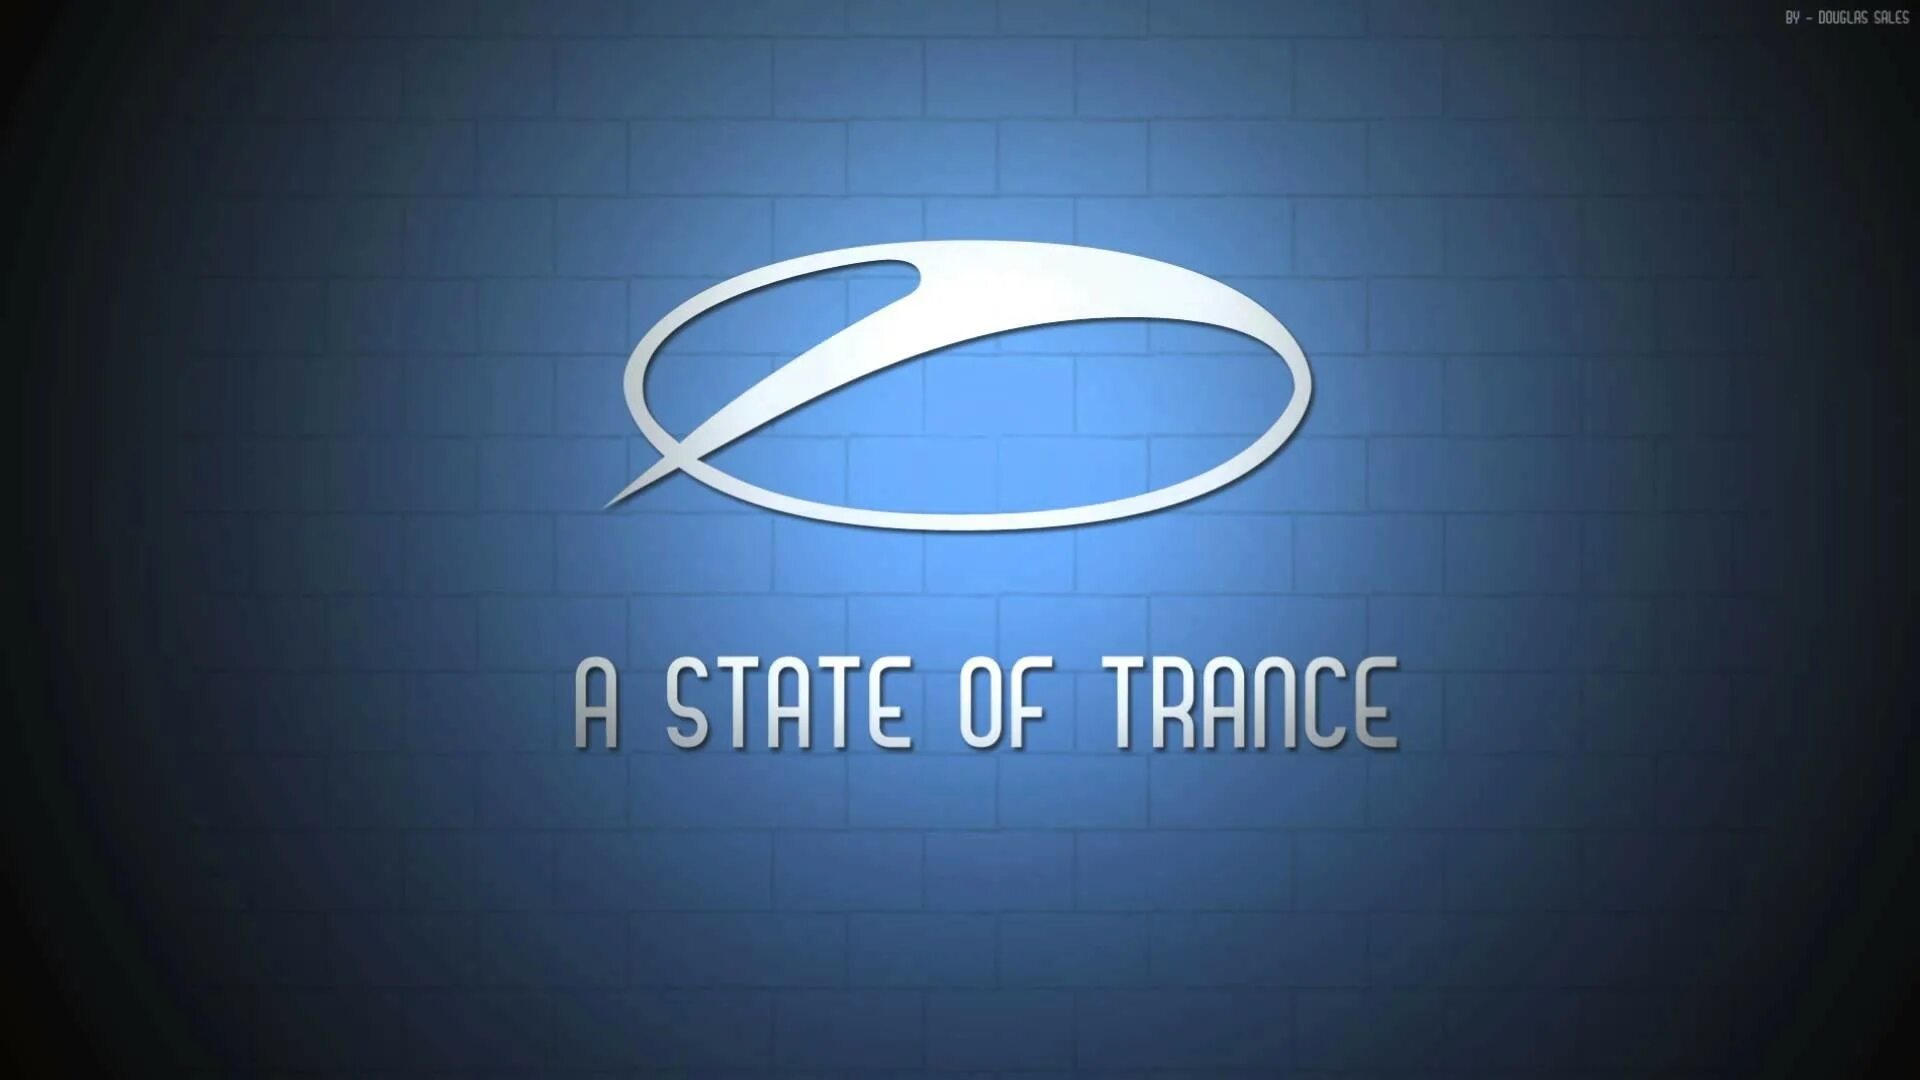 A State of Trance. ASOT эмблема. A State of Trance логотип. ASOT обои.